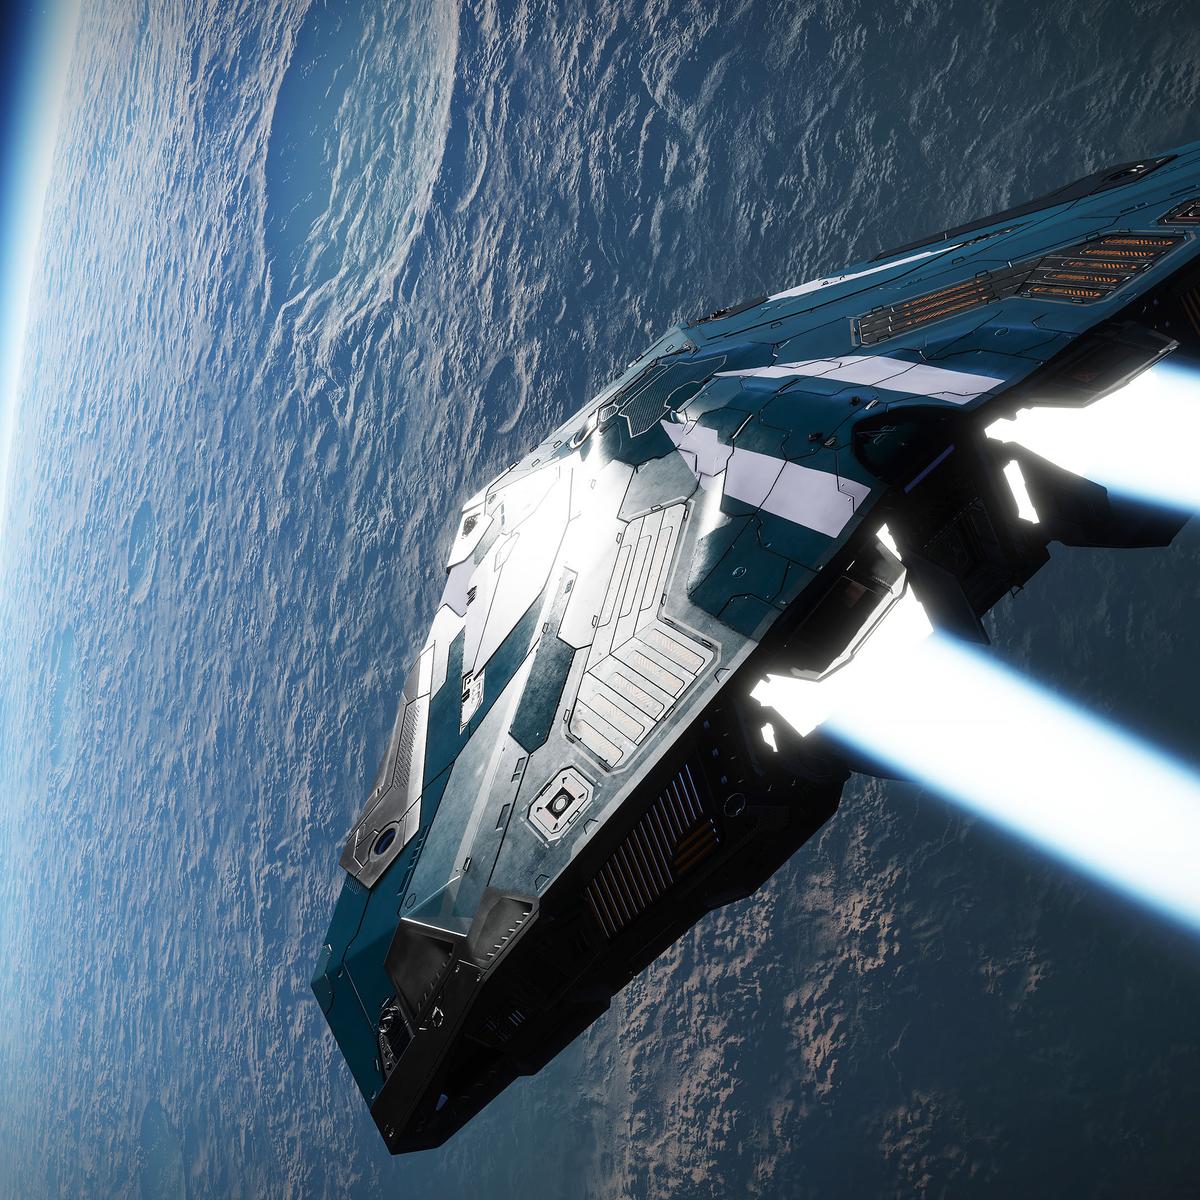 Elite: Dangerous free update adds new ships, weapons and space mysteries  today